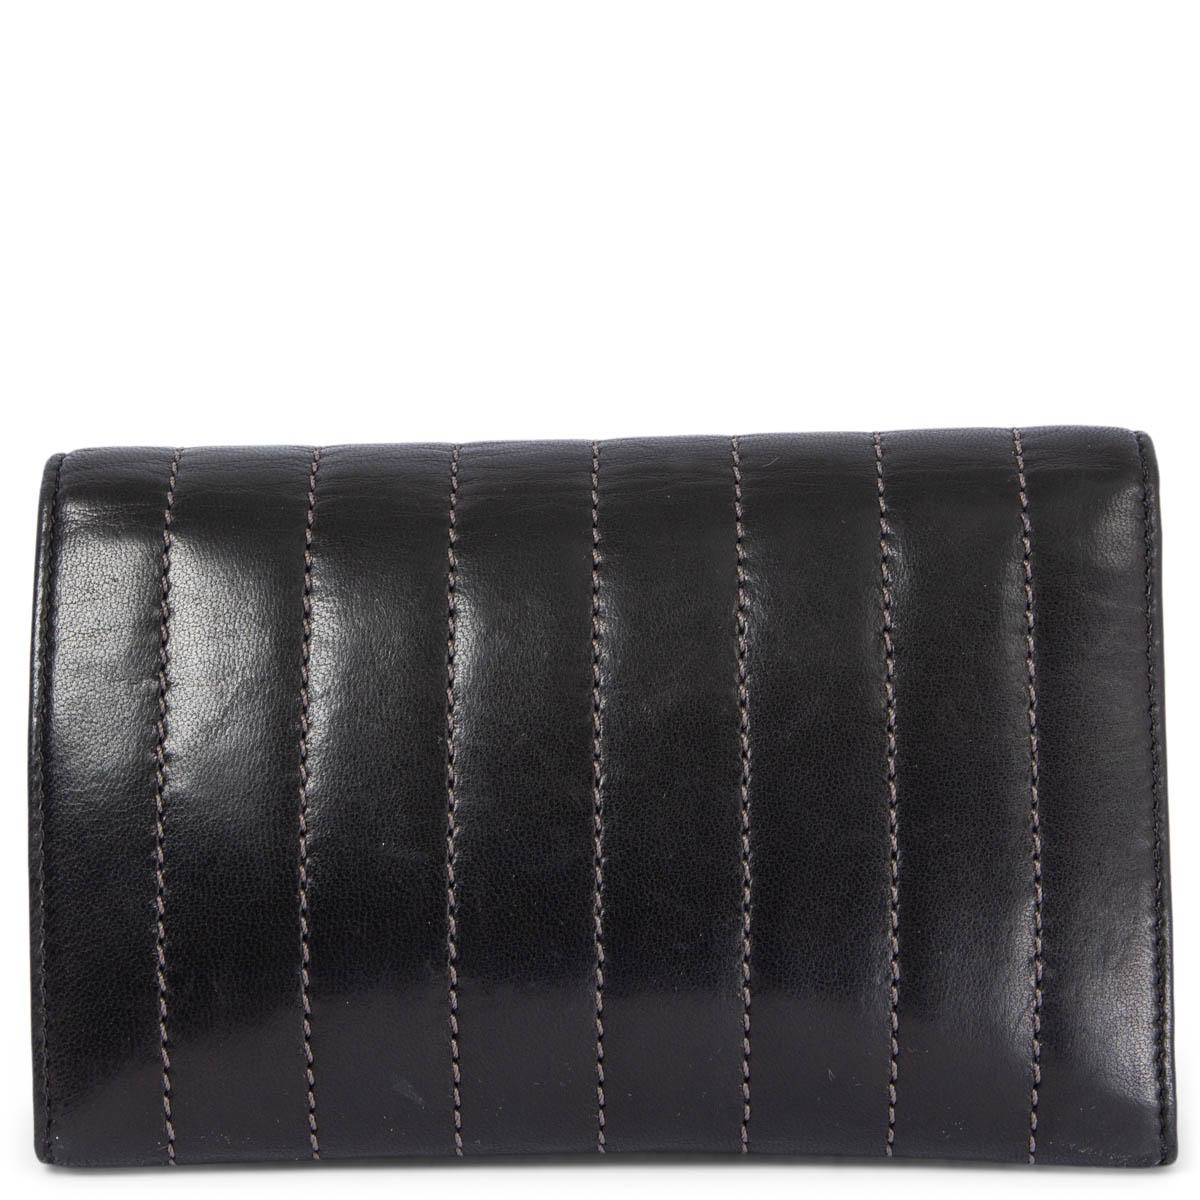 Women's CHANEL black quilted leather Wallet For Sale